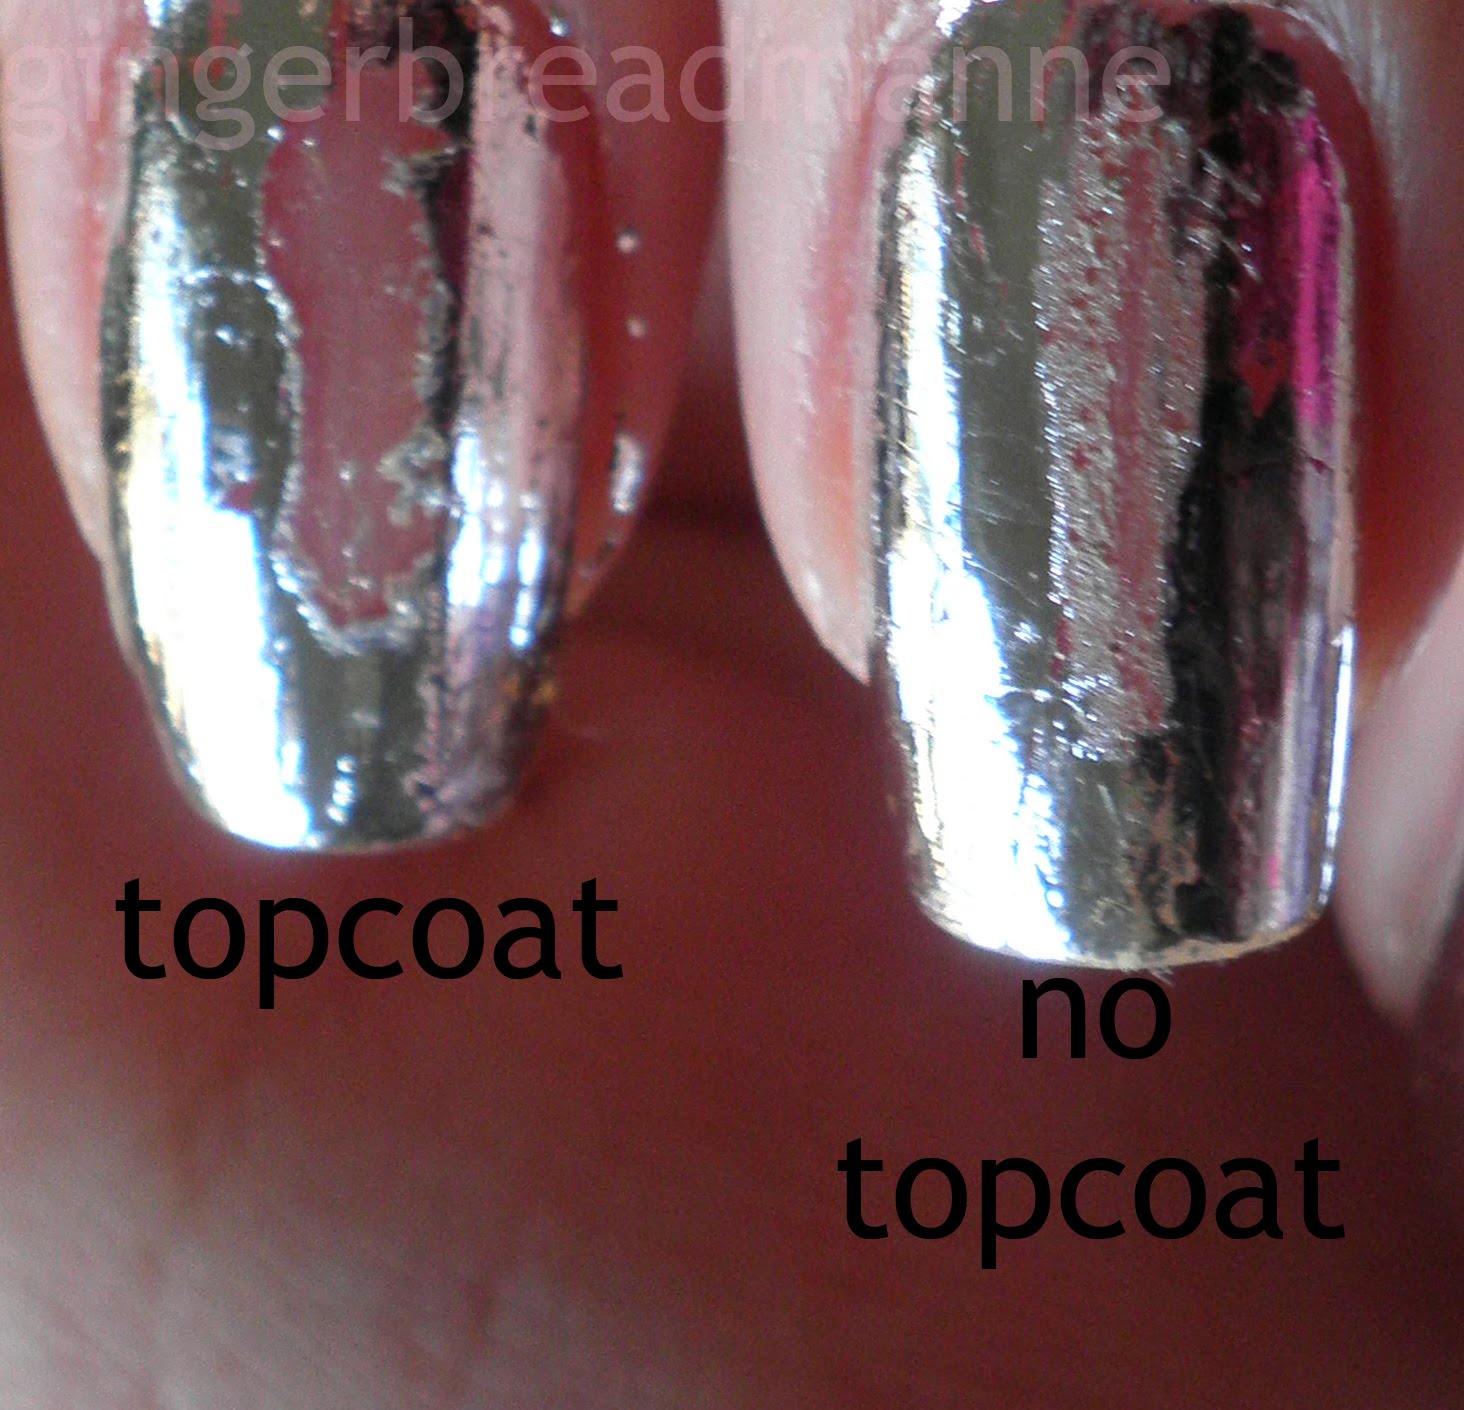 The foils can be easily removed with nail polish remover (no acetone